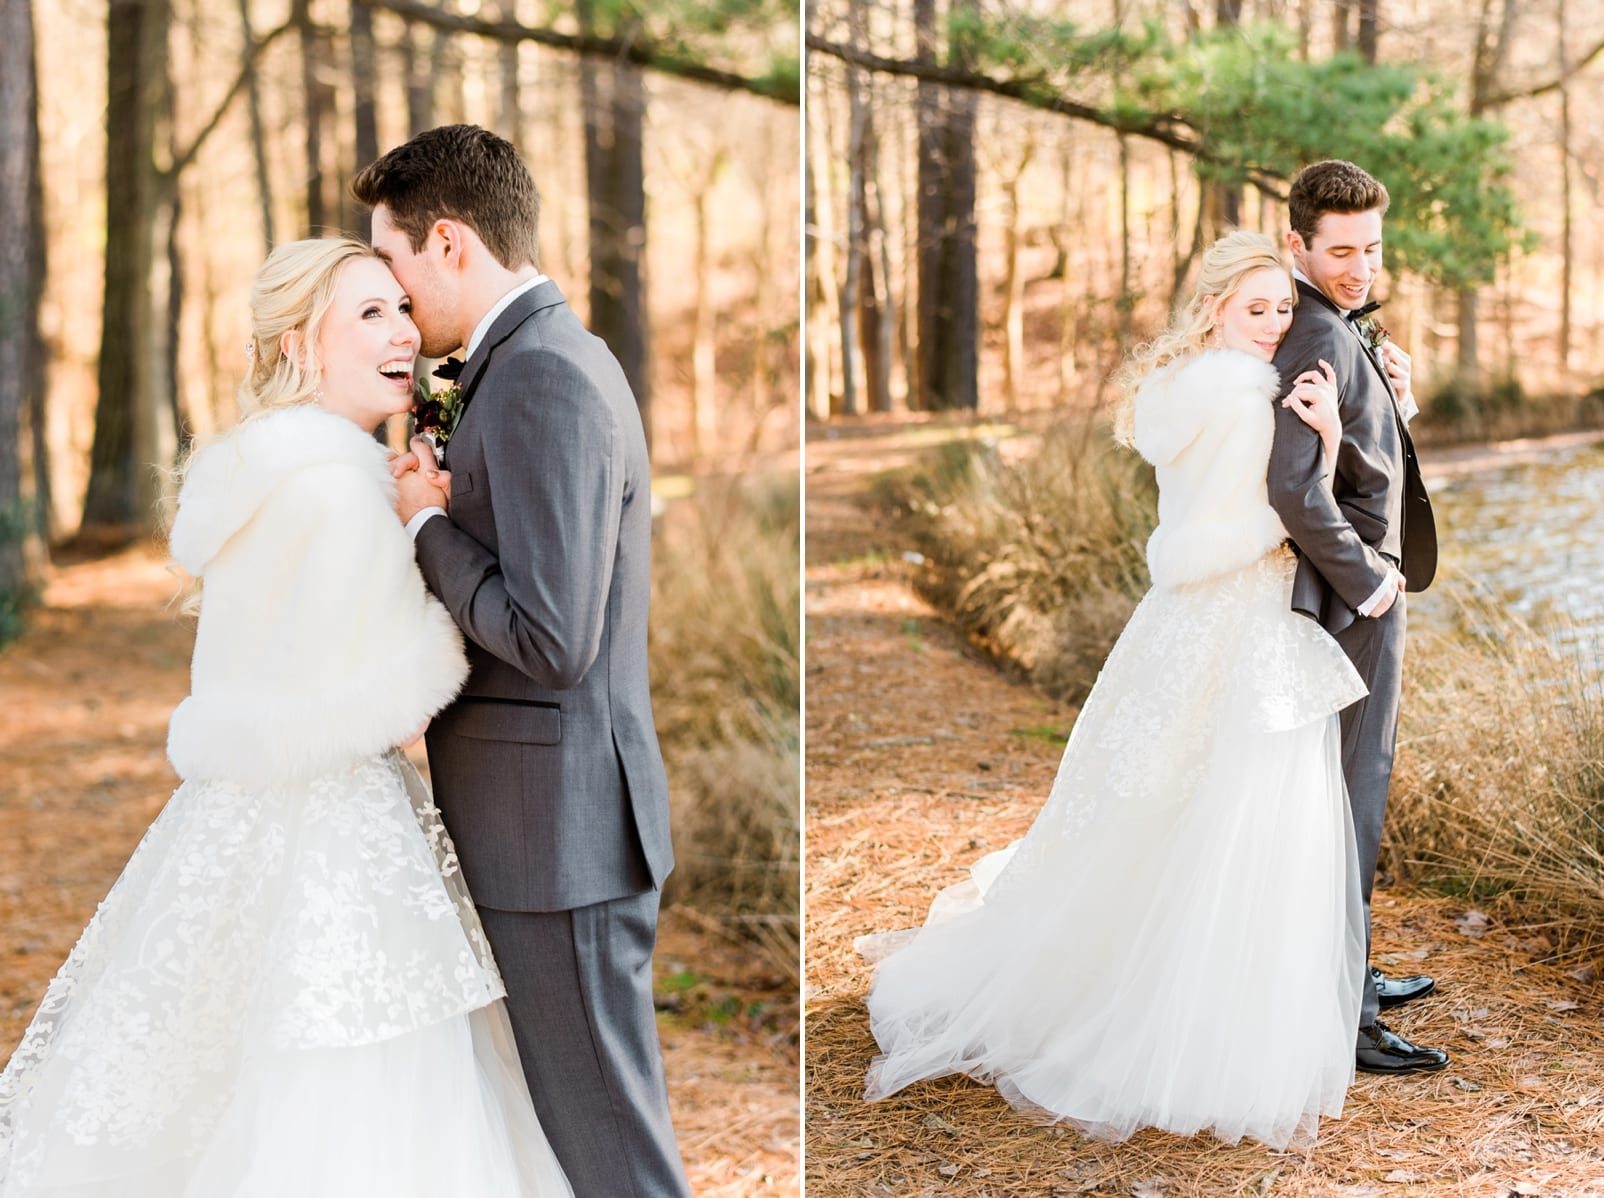 Raleigh Bride and groom standing and laughing together on a path with pine needles photo